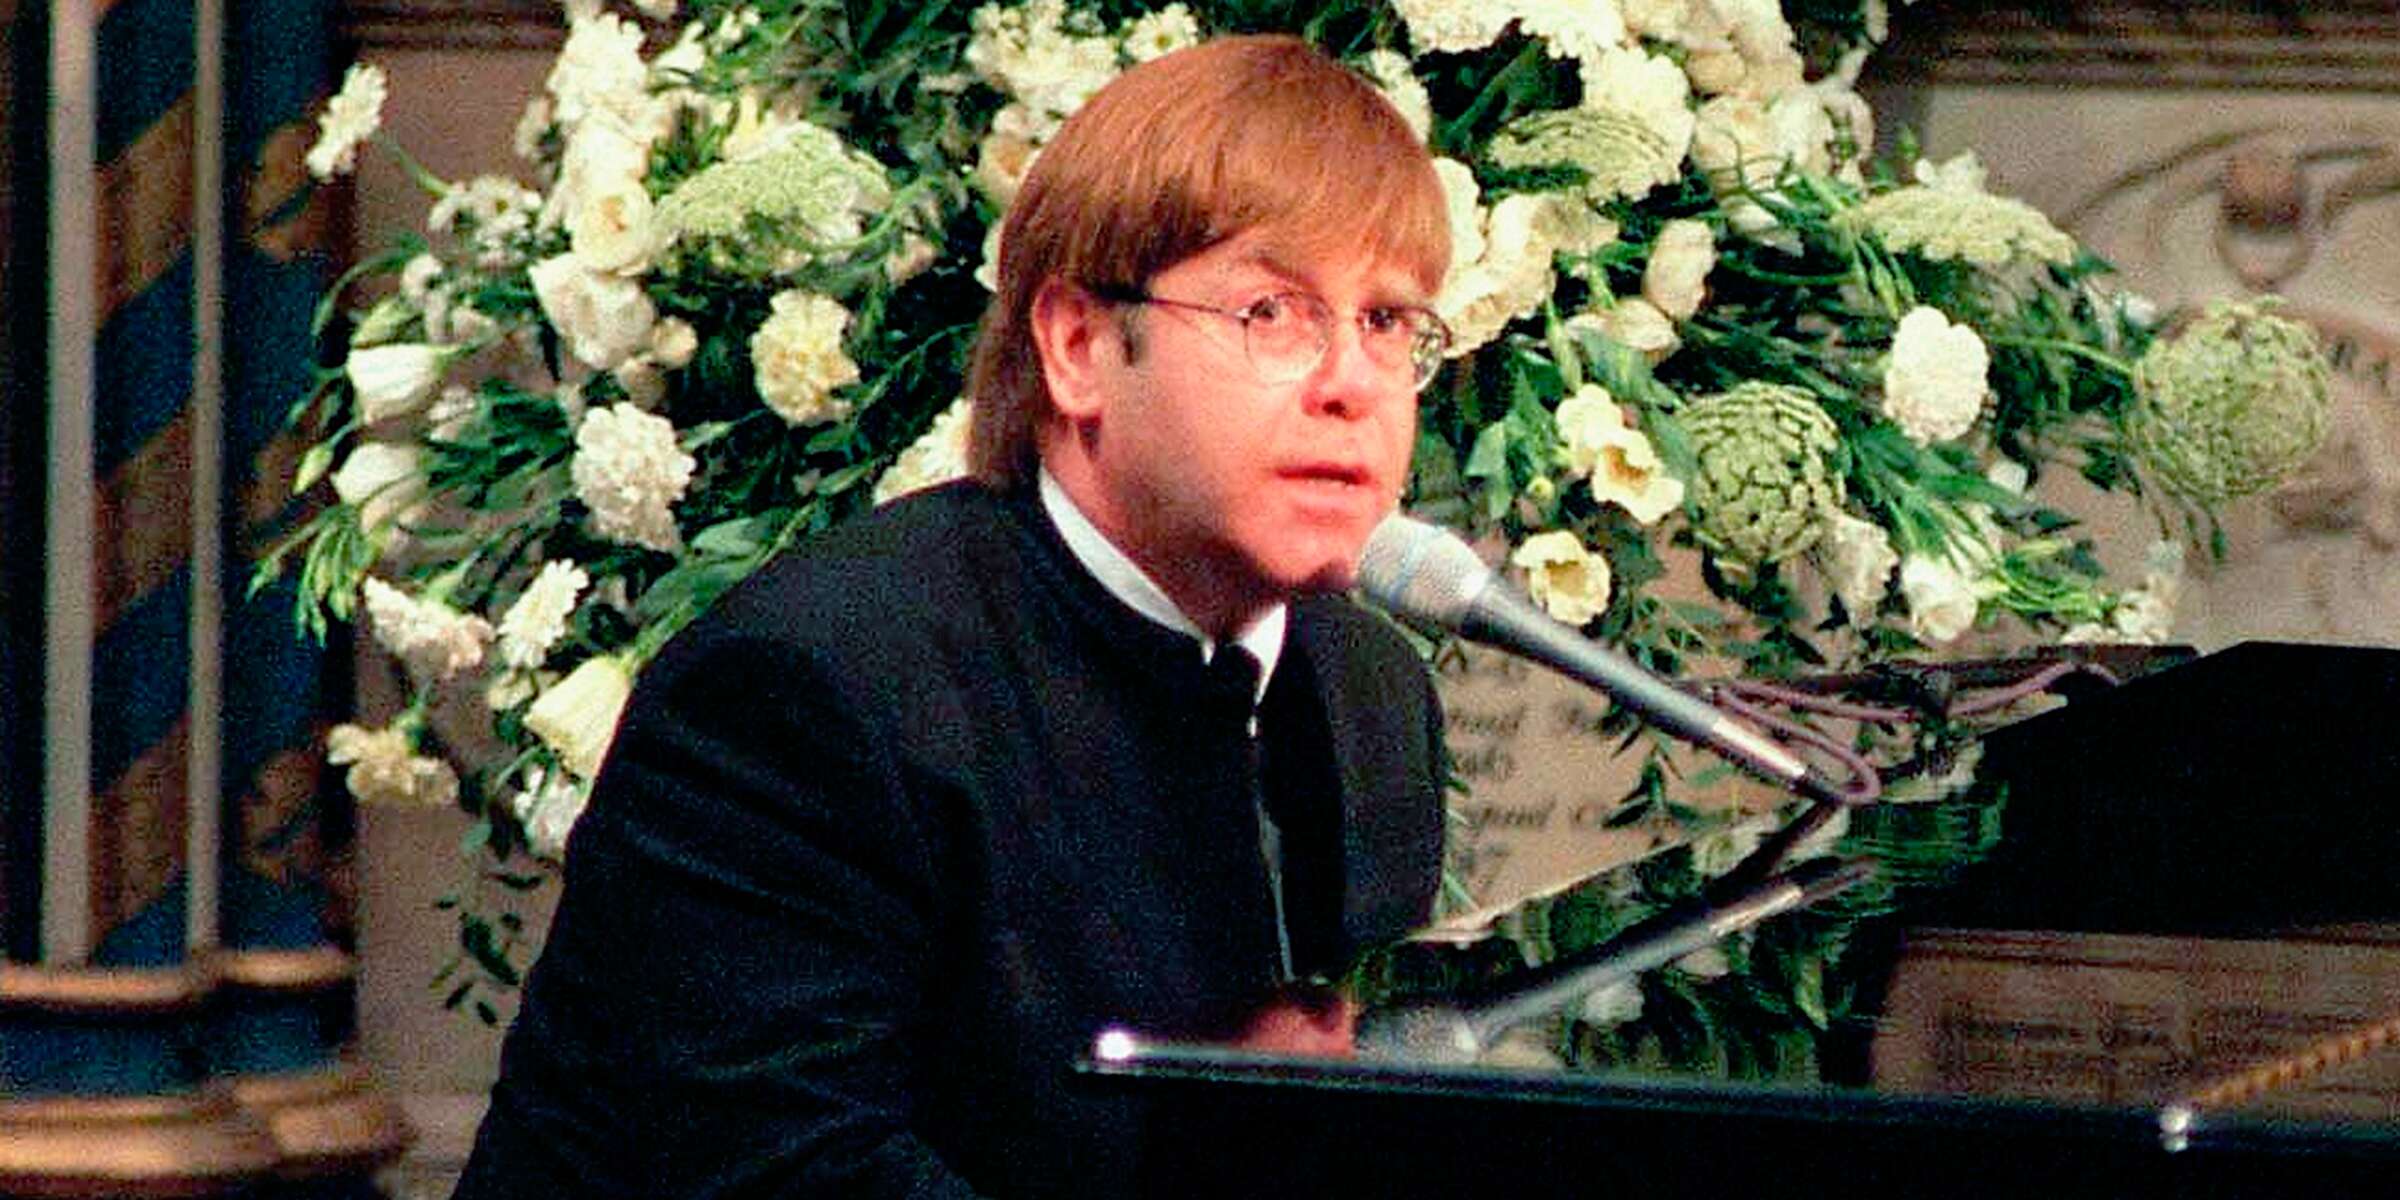 Elton John singing Candle in the Wind at Princess Diana's funeral